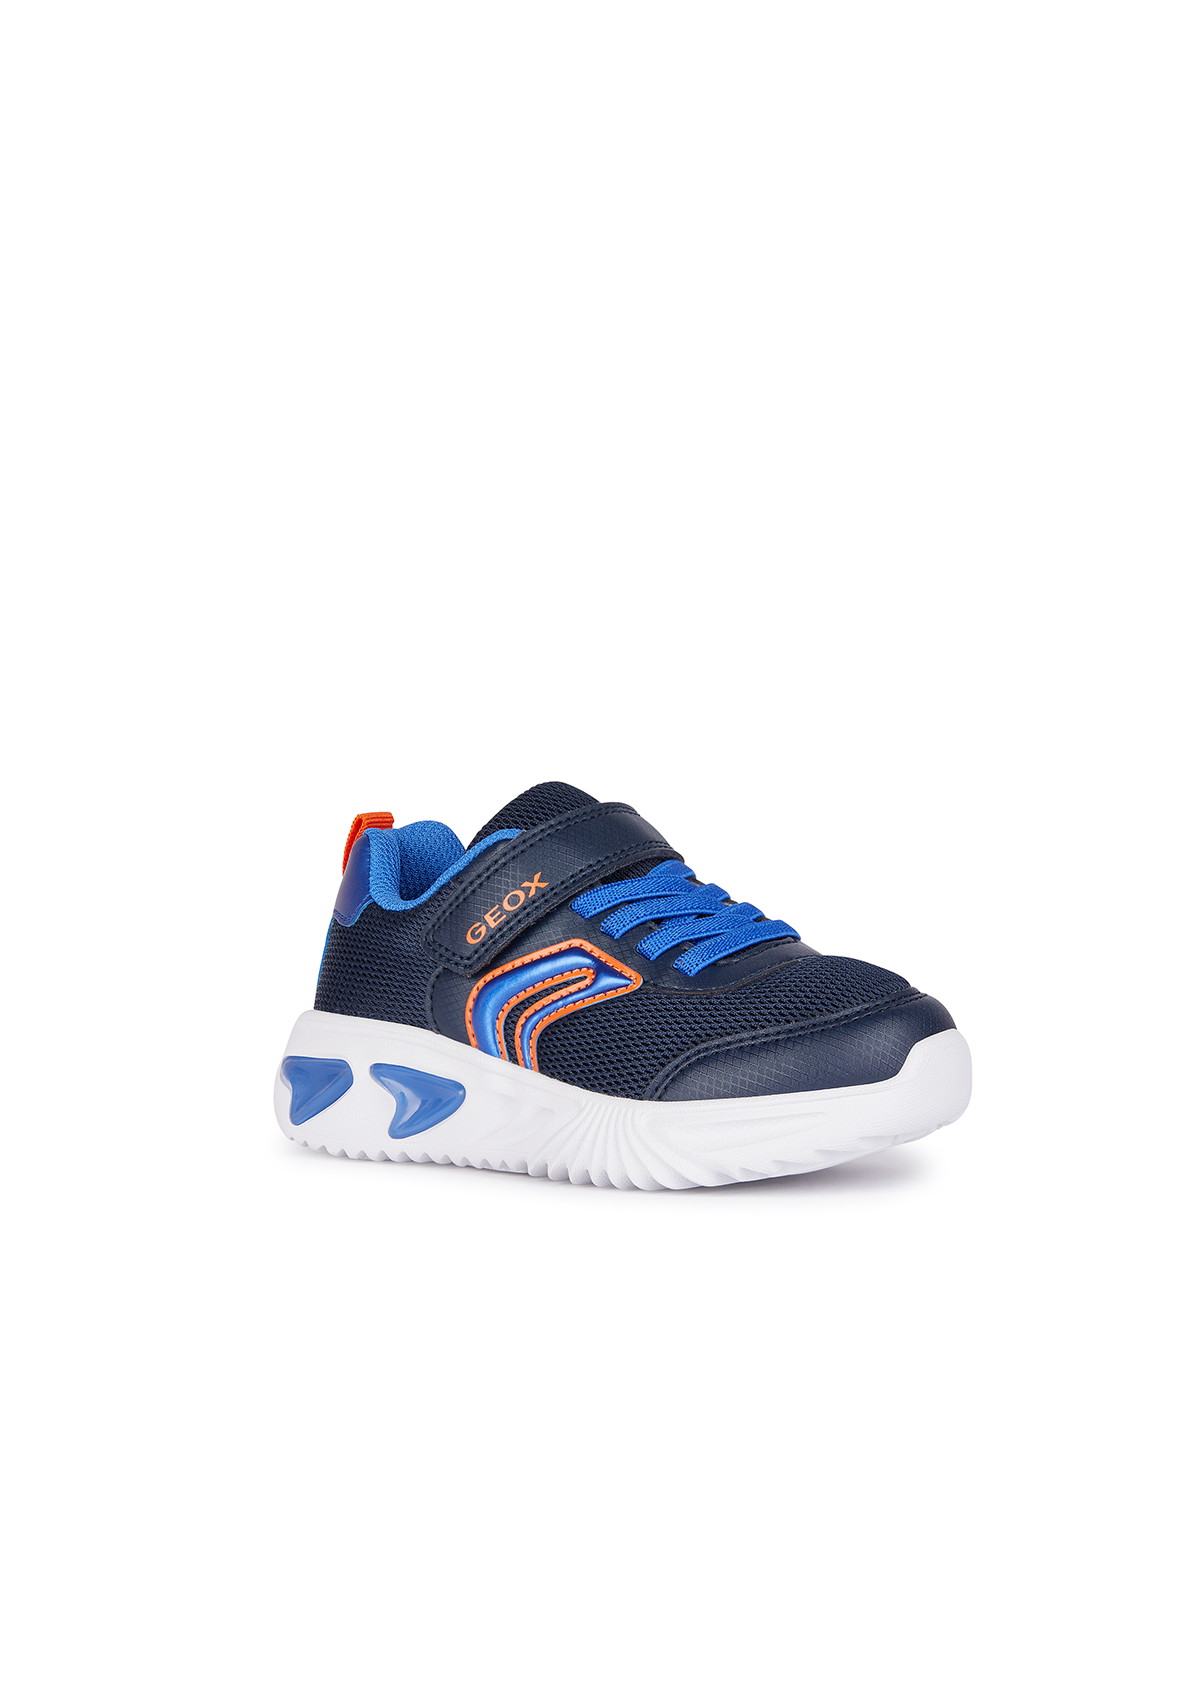 Geox Boys Trainer ASSISTER Lights-Up Navy Royal